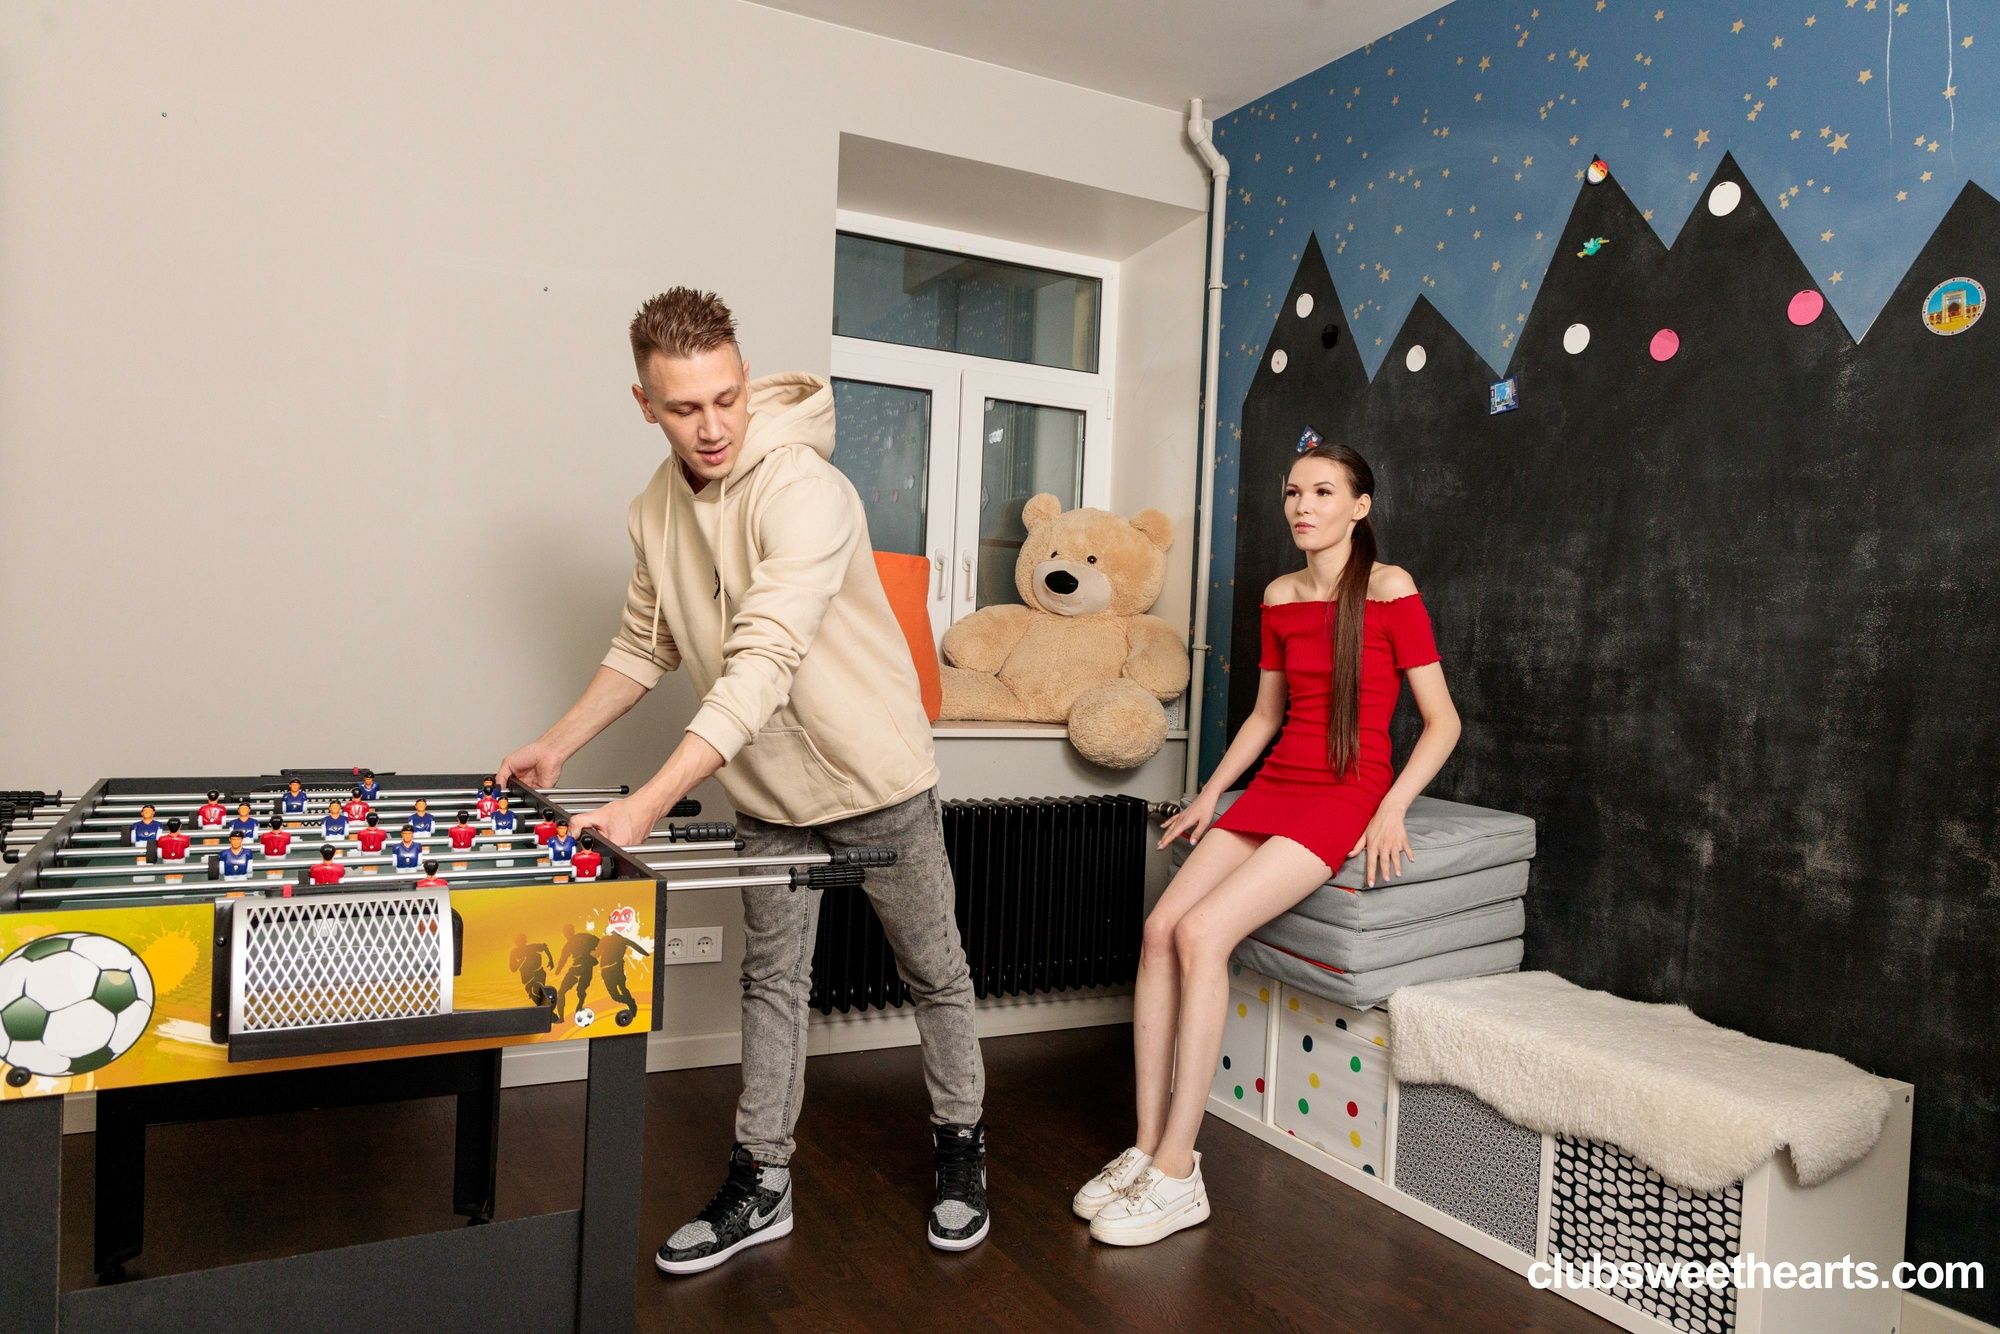 Fussball nut cracker at ClubSweethearts #14